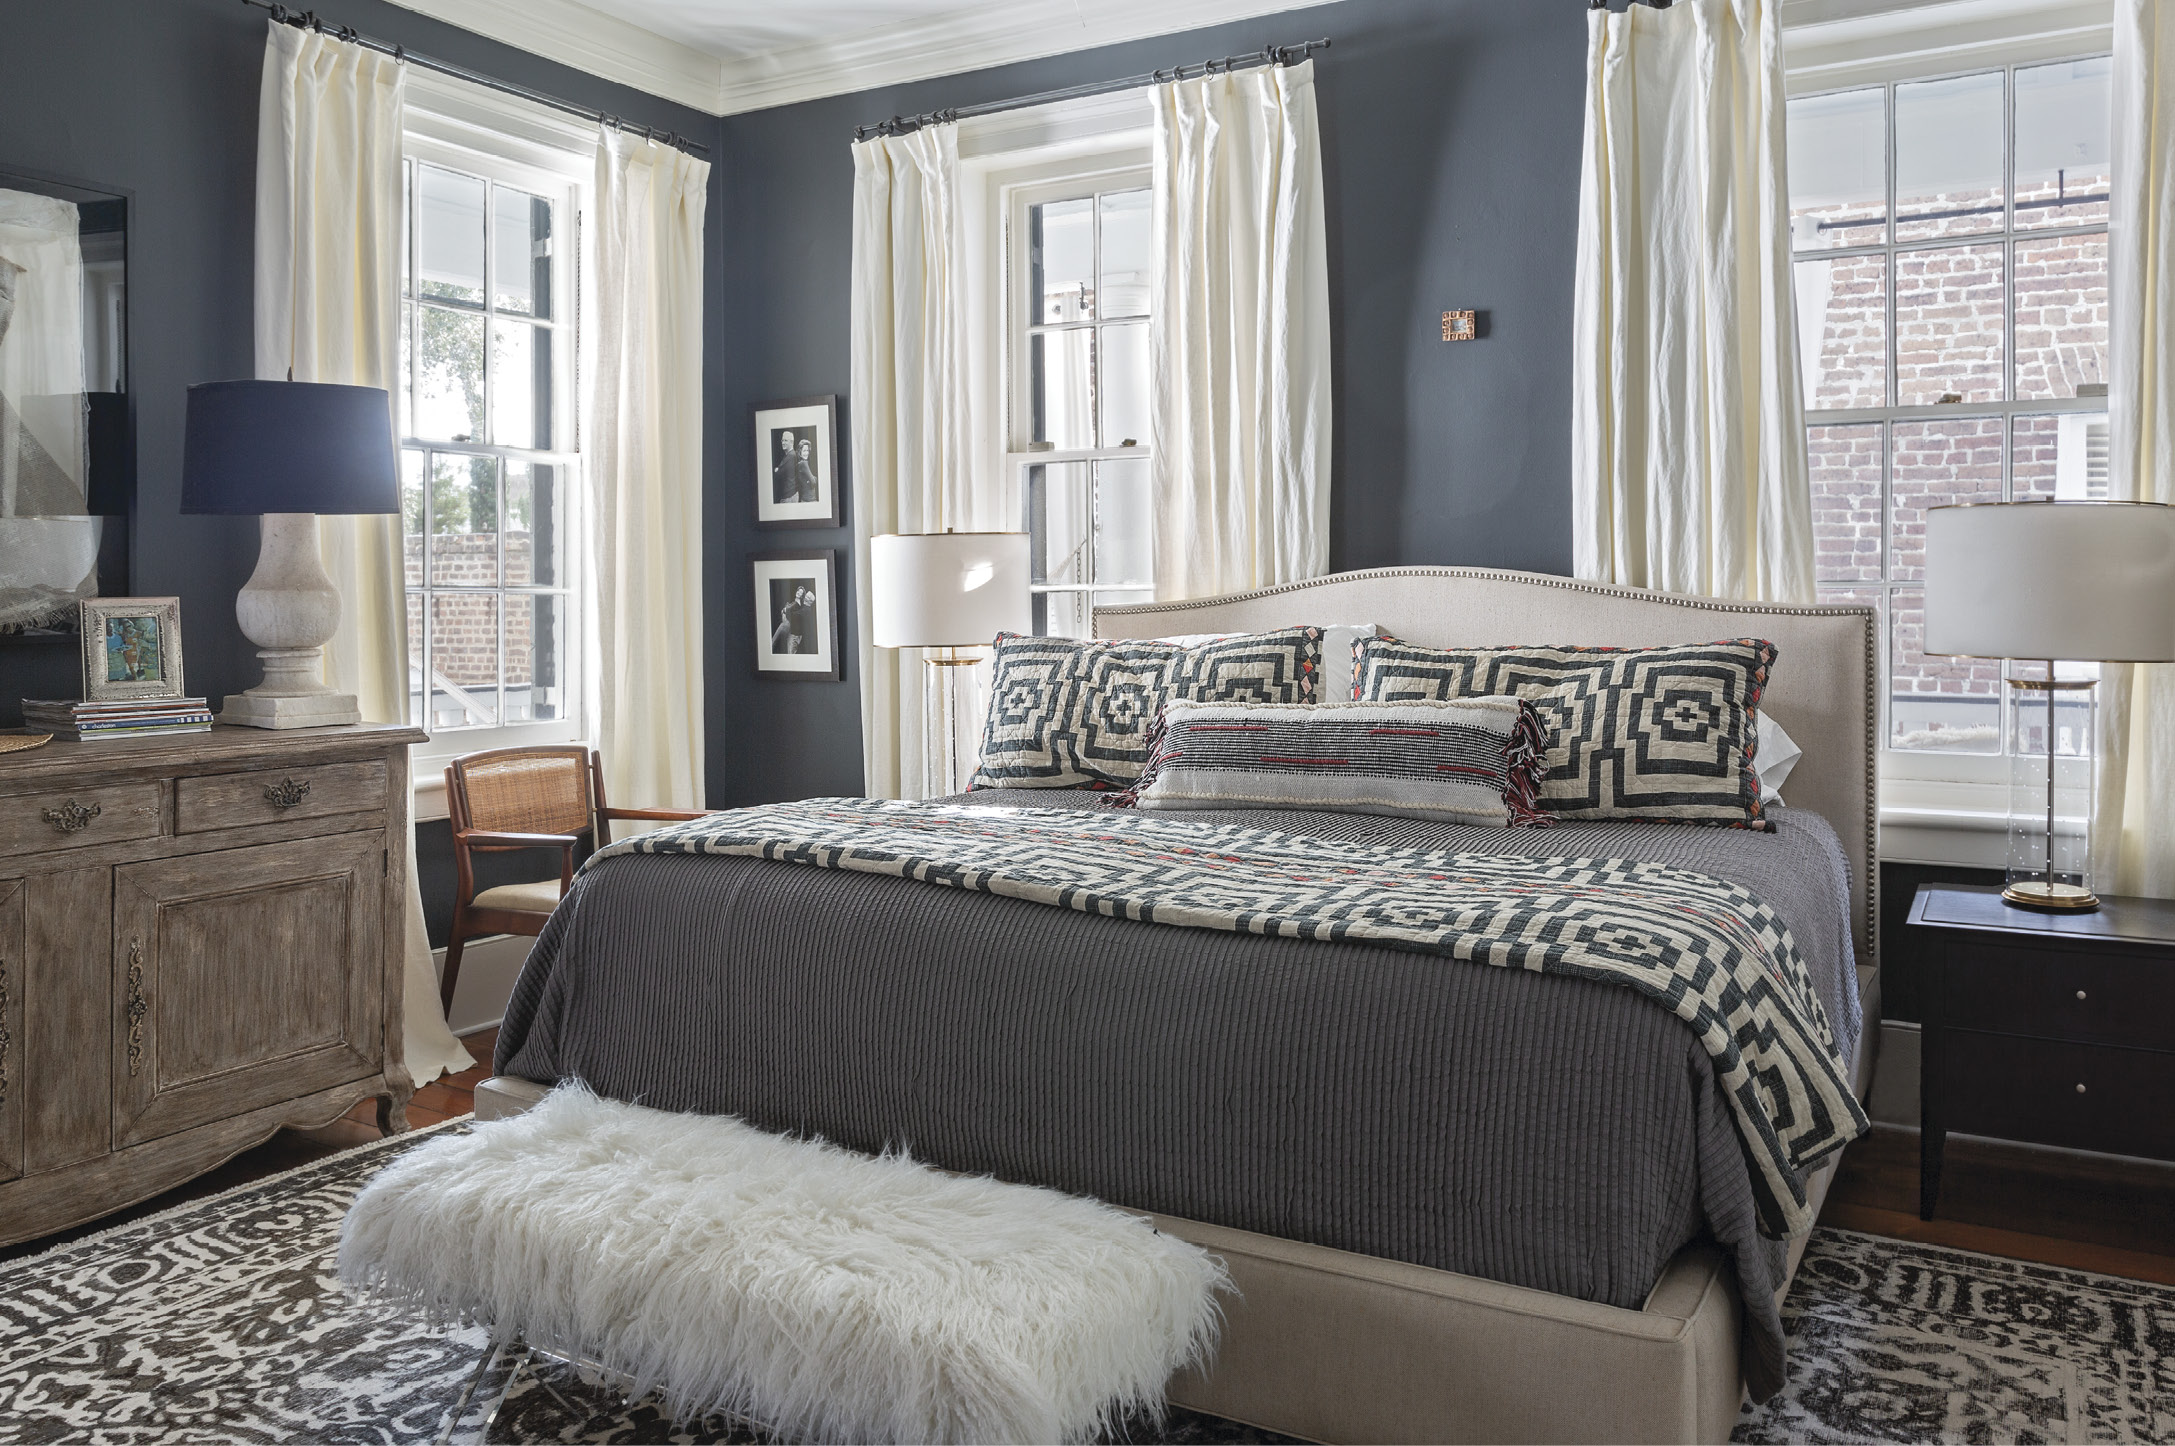 Boho Bedrooms: Justina Blakeney bedding adds a Bohemian touch to the light-filled master bedroom.